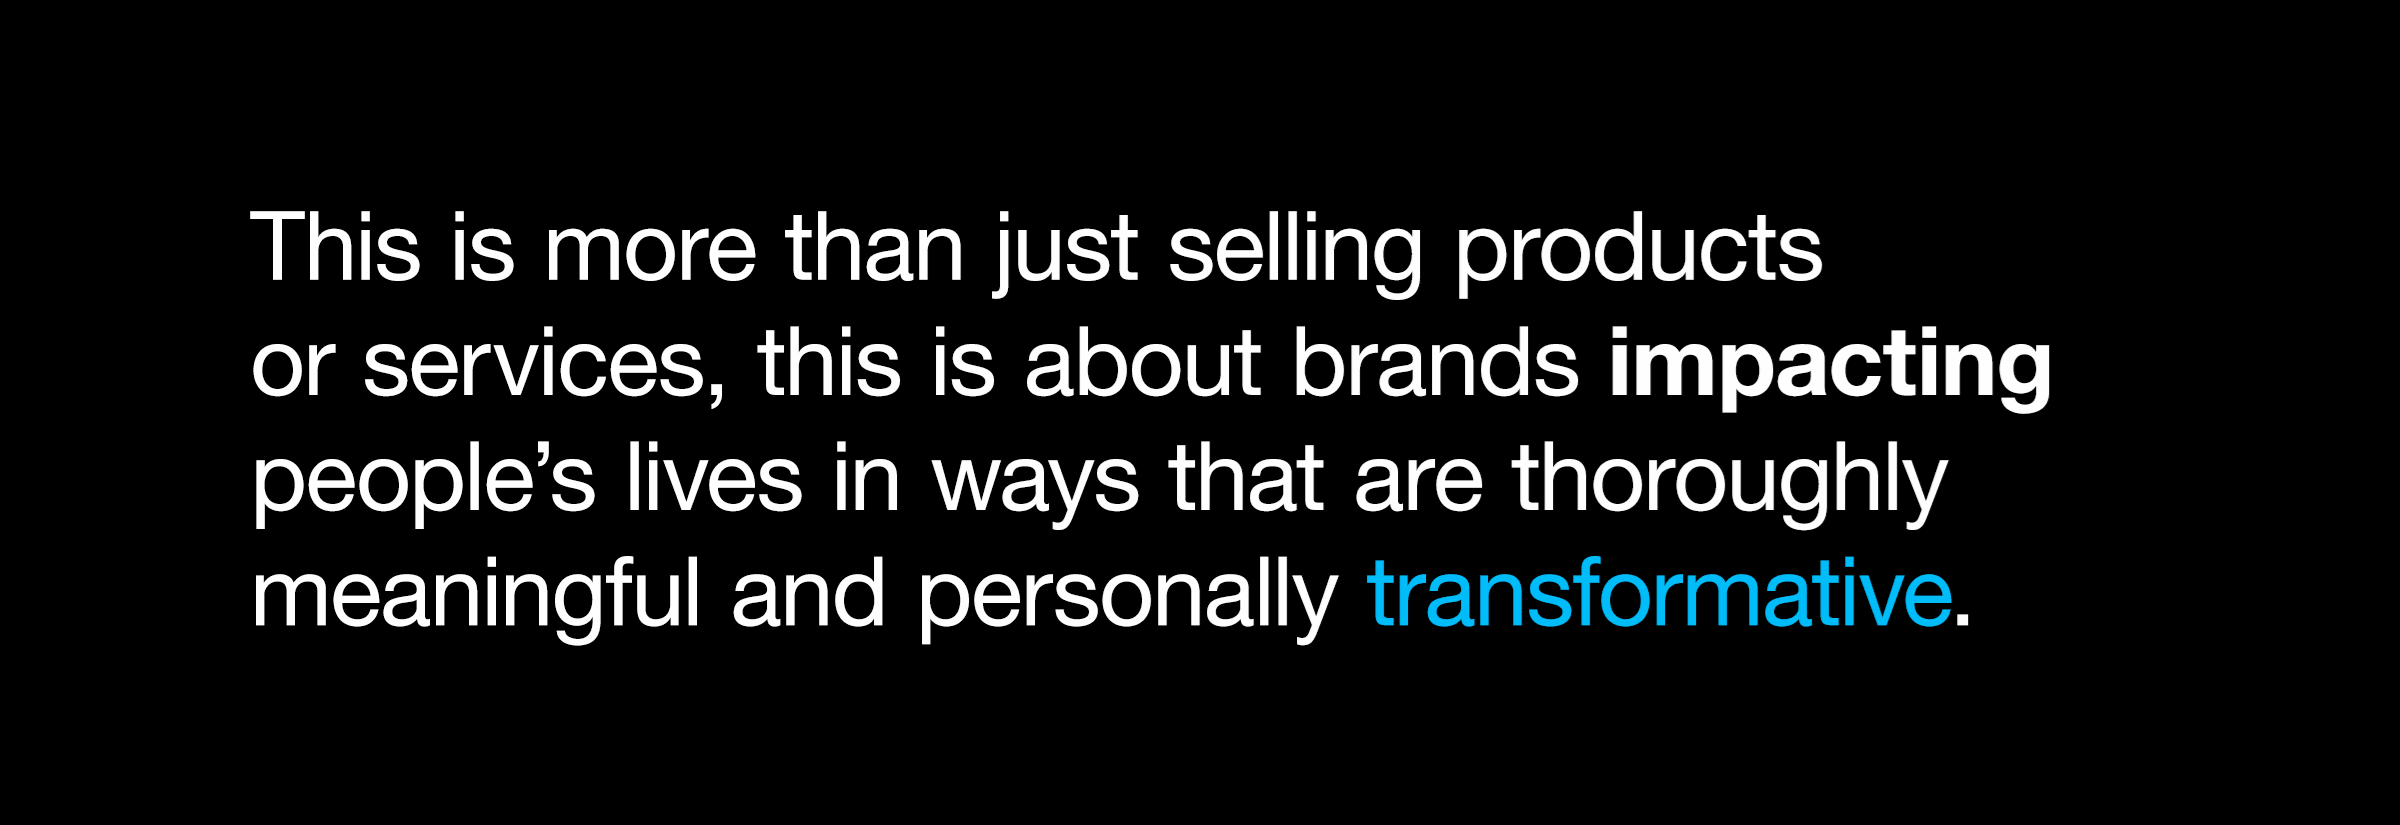 Blurring the Brand Experience Boundaries Quote Image